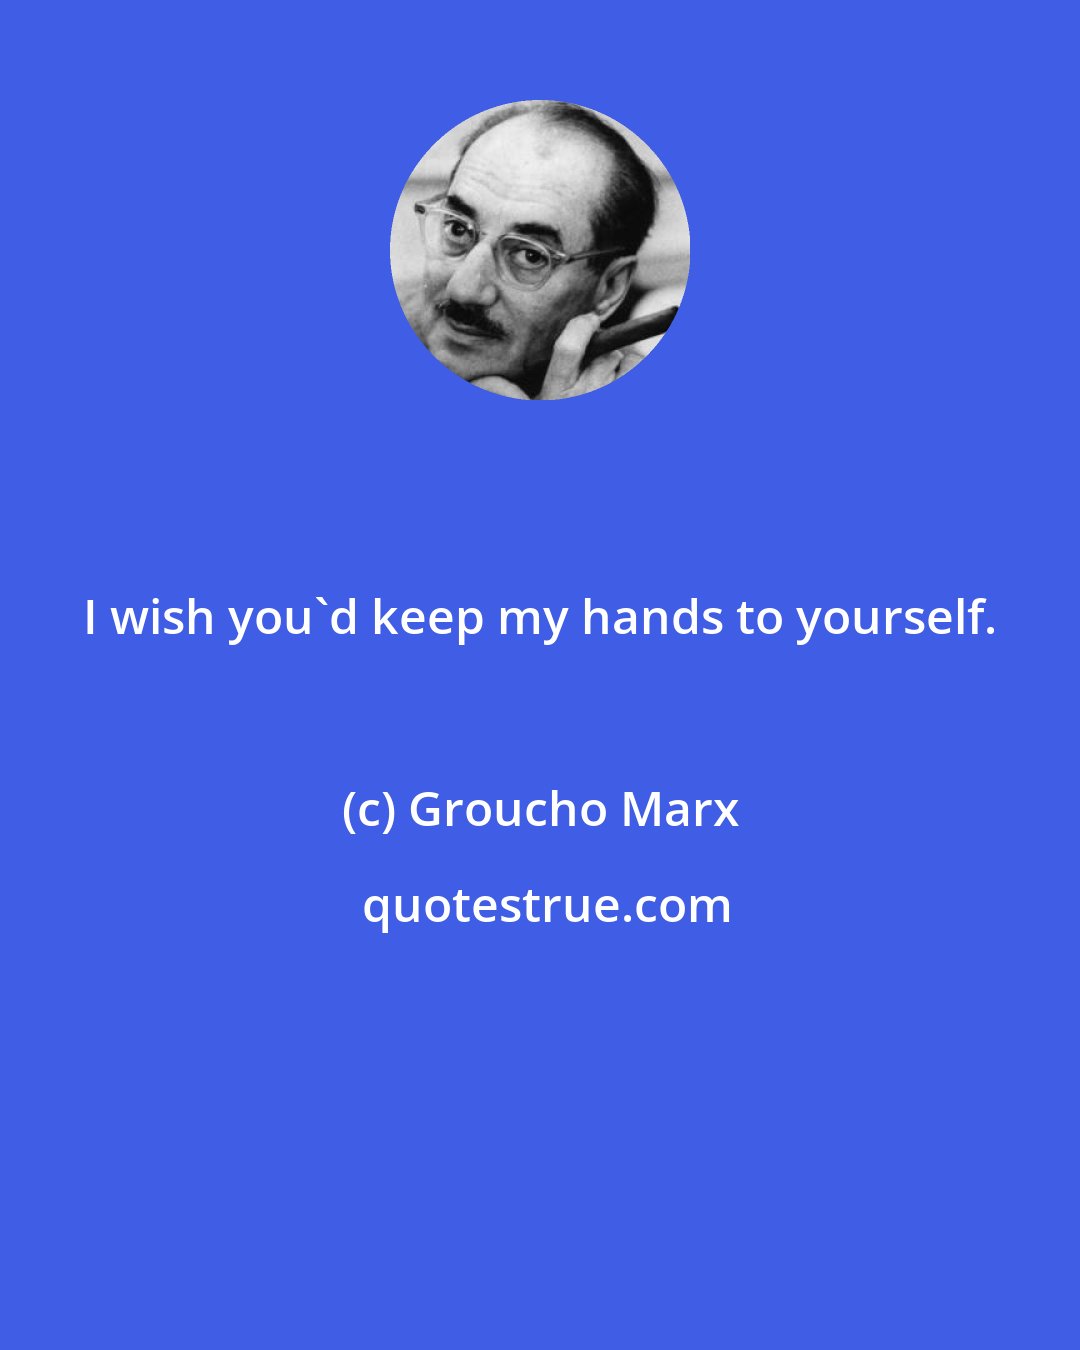 Groucho Marx: I wish you'd keep my hands to yourself.